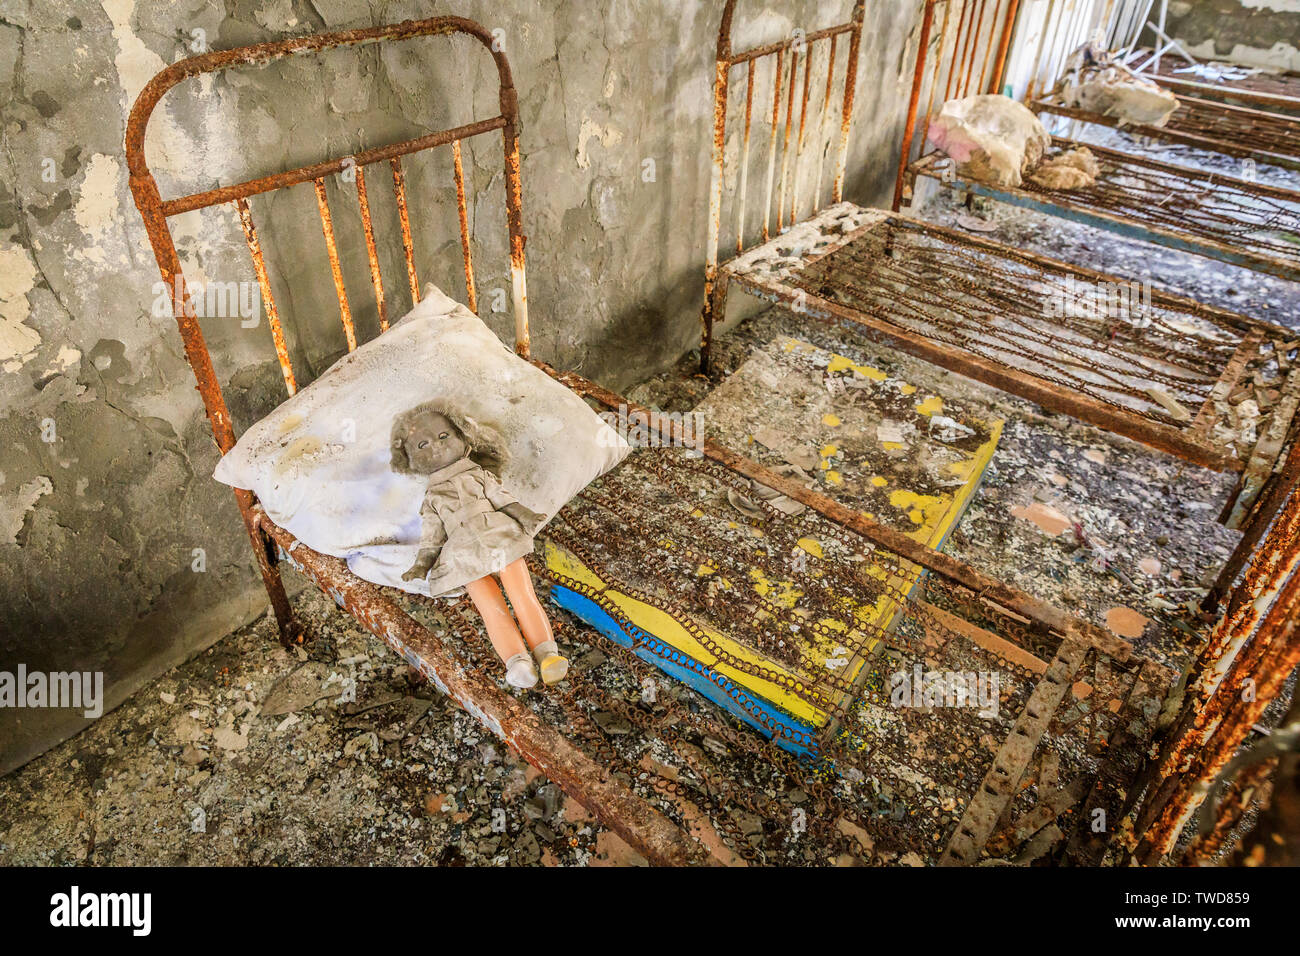 Eastern Europe, Ukraine, Pripyat, Chernobyl. Toys and beds in the dormitory of the kindergarten. Stock Photo